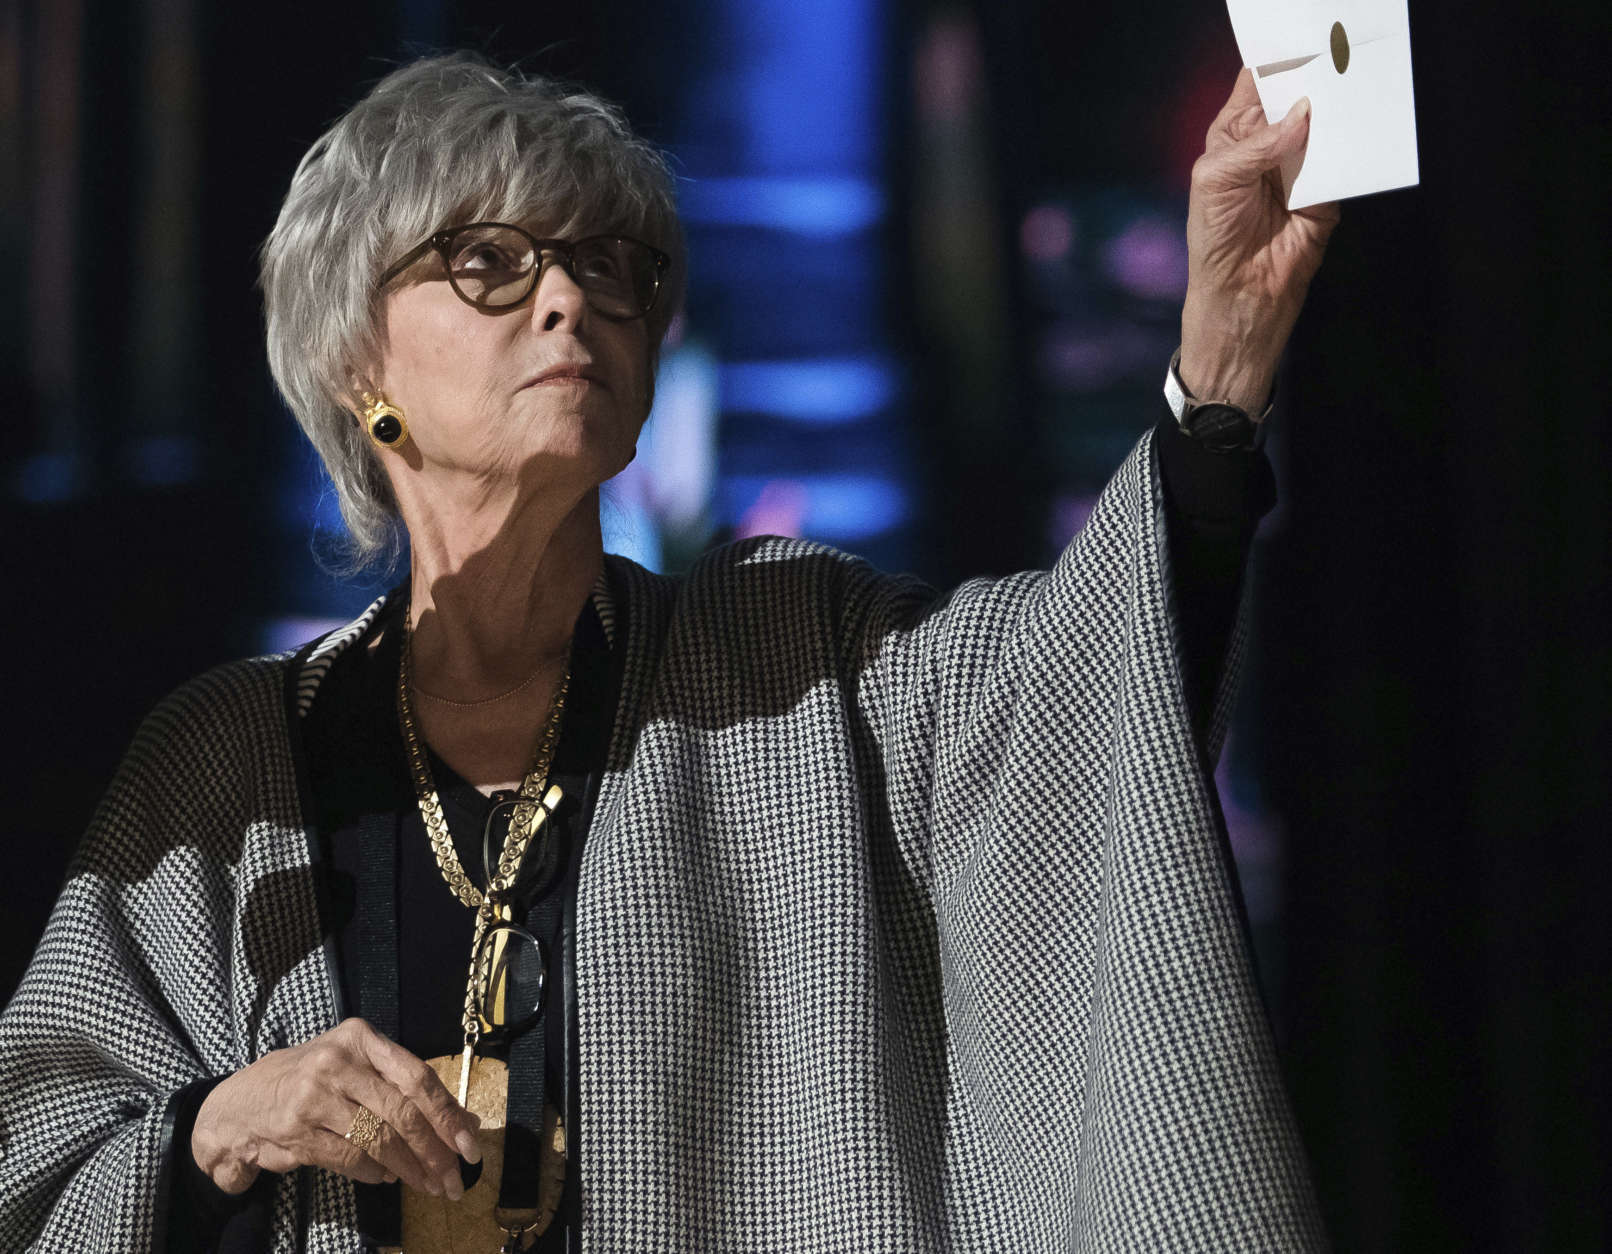 Rita Moreno appears during rehearsals for the 90th Academy Awards in Los Angeles on Saturday, March 3, 2018. The Academy Awards will be held at the Dolby Theatre on Sunday, March 4. (Photo by Charles Sykes/Invision/AP)